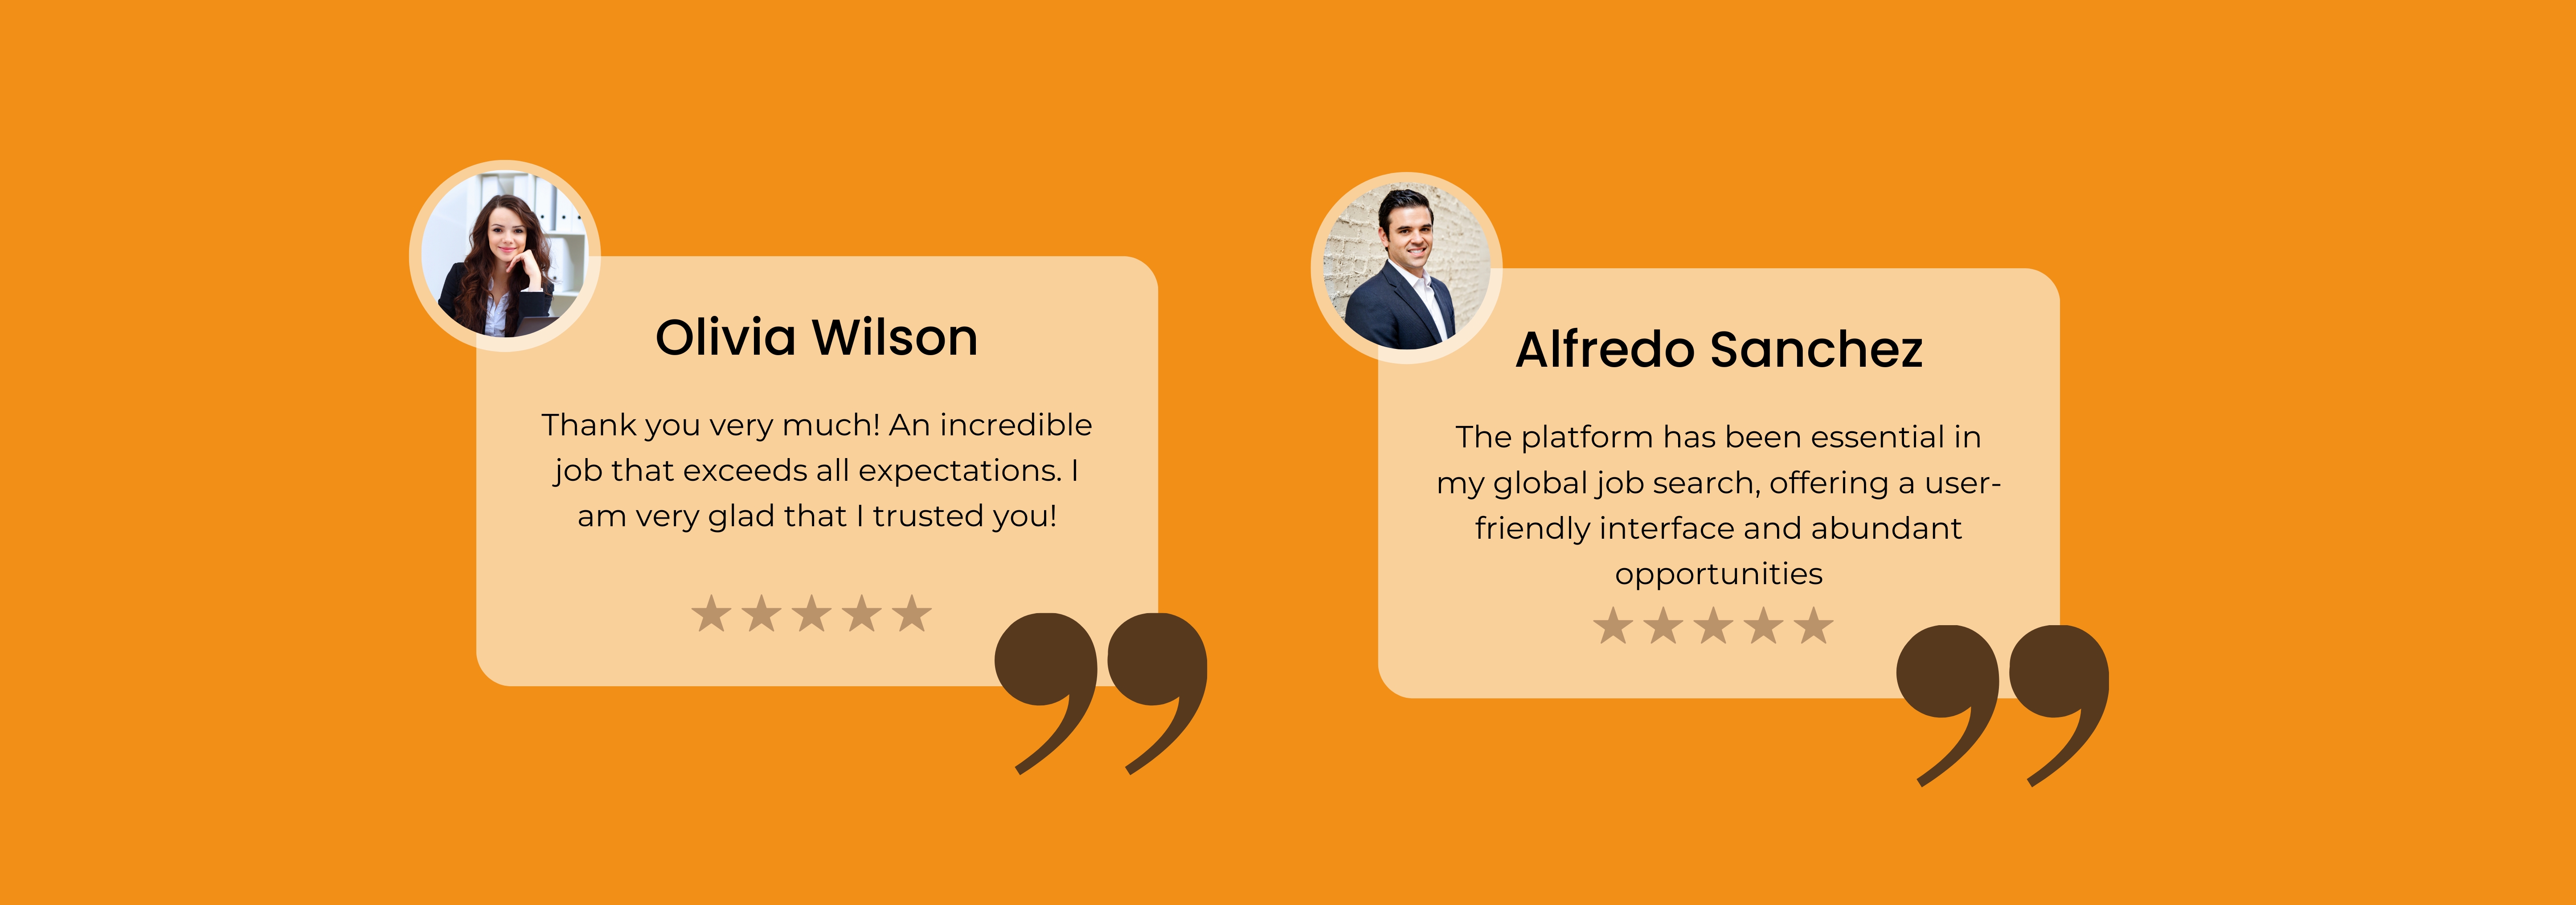 Olivia Wilson

Thank you very much! An incredible
job that exceeds all expectations. |
am very glad that | trusted youl!

% % % kk

 

Alfredo Sanchez

The platform has been essential in
my global job search, offering a user-
friendly interface and abundant
opportunities

% % % kk